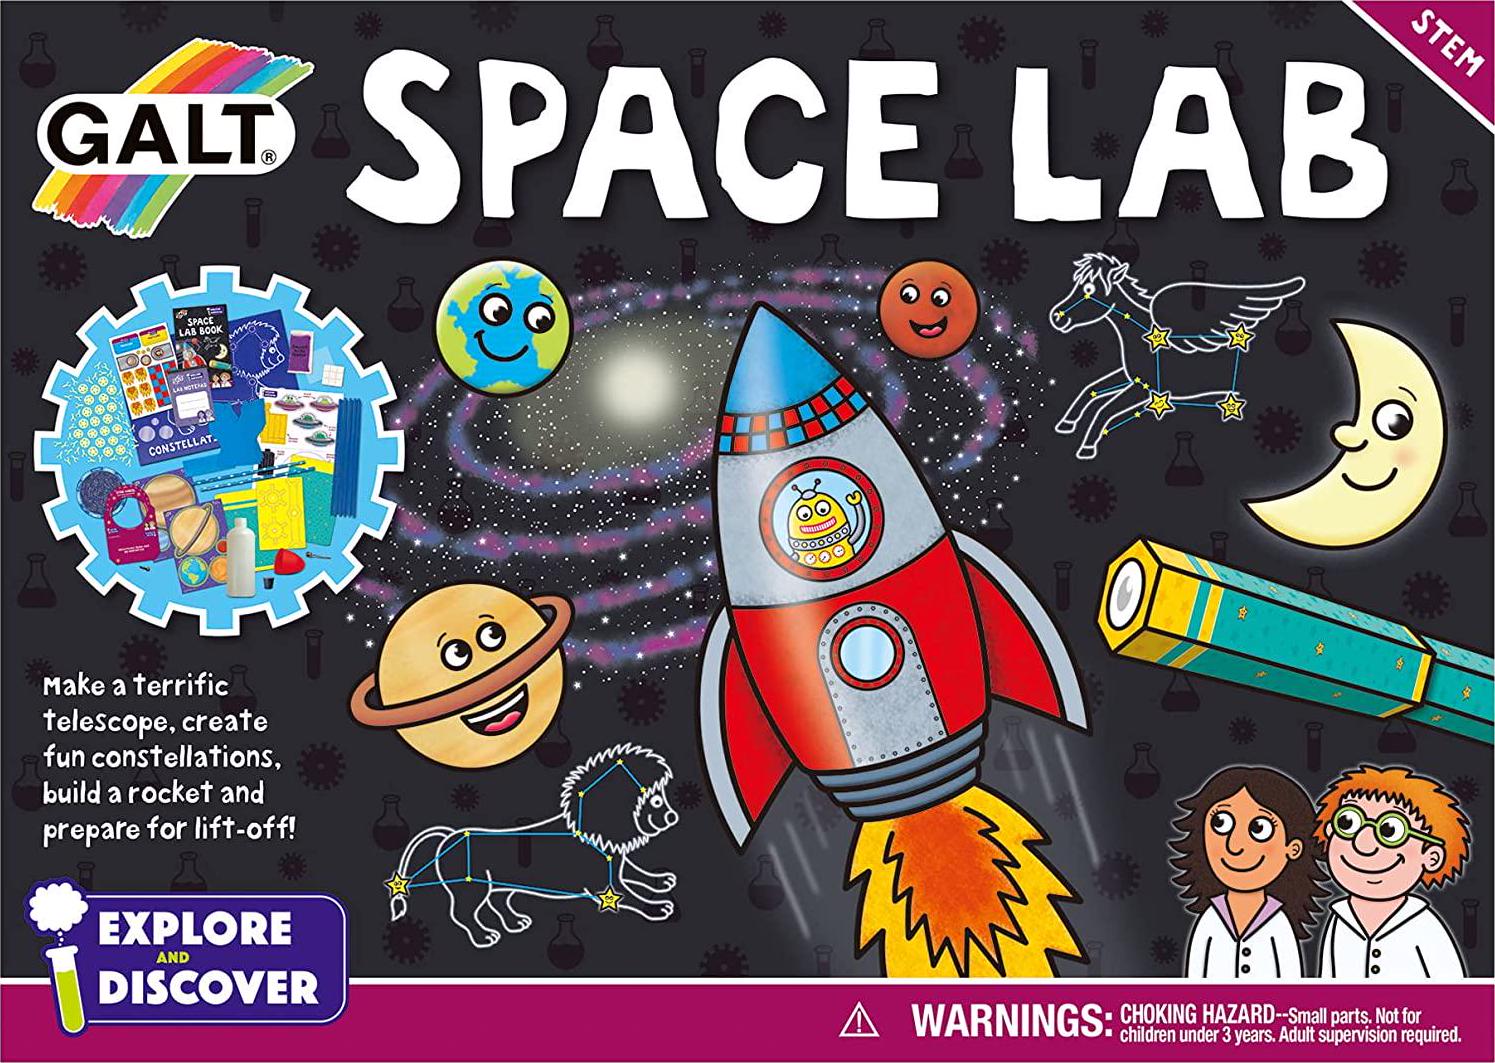 Galt, Galt Toys, Space Lab, Science Kit for Kids, Ages 6 Years Plus